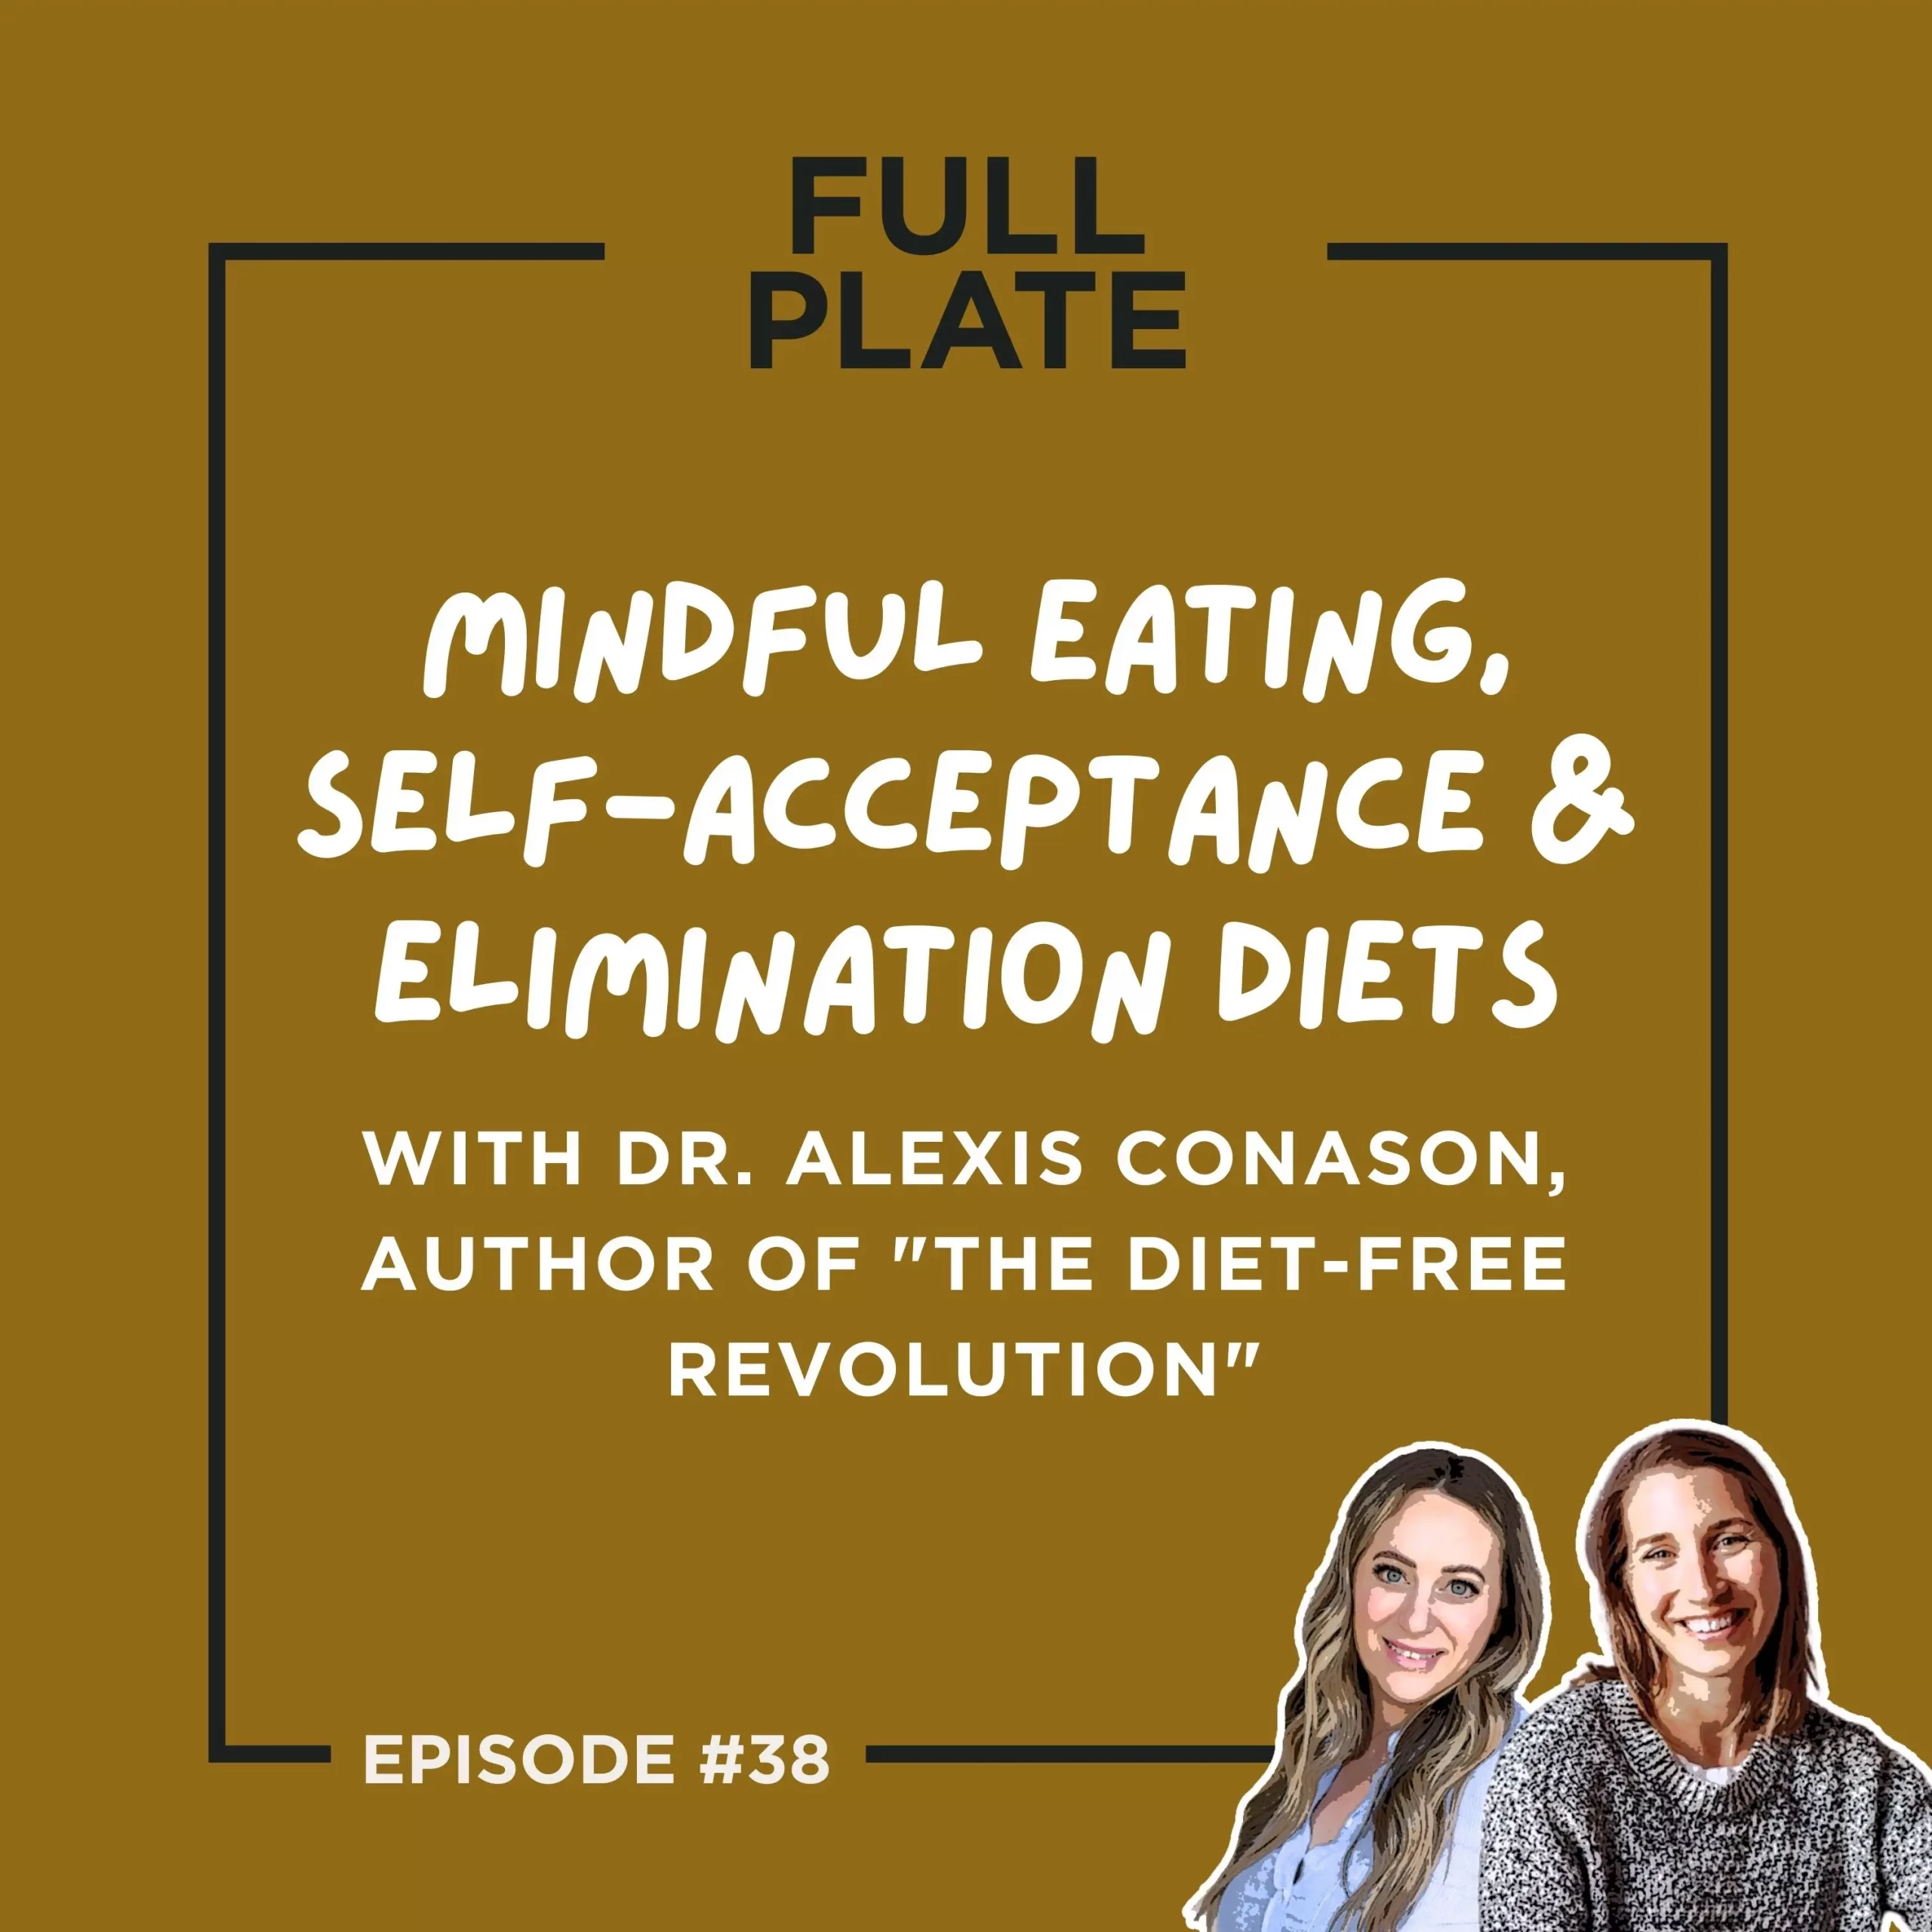 Full Plate Podcast | Ditch diet culture, respect your body, and set boundaries | Episode 38: Mindful Eating, Self-Acceptance, & Elimination Diets with Dr. Alexis Conason, Author of "The Diet-Free Revolution"